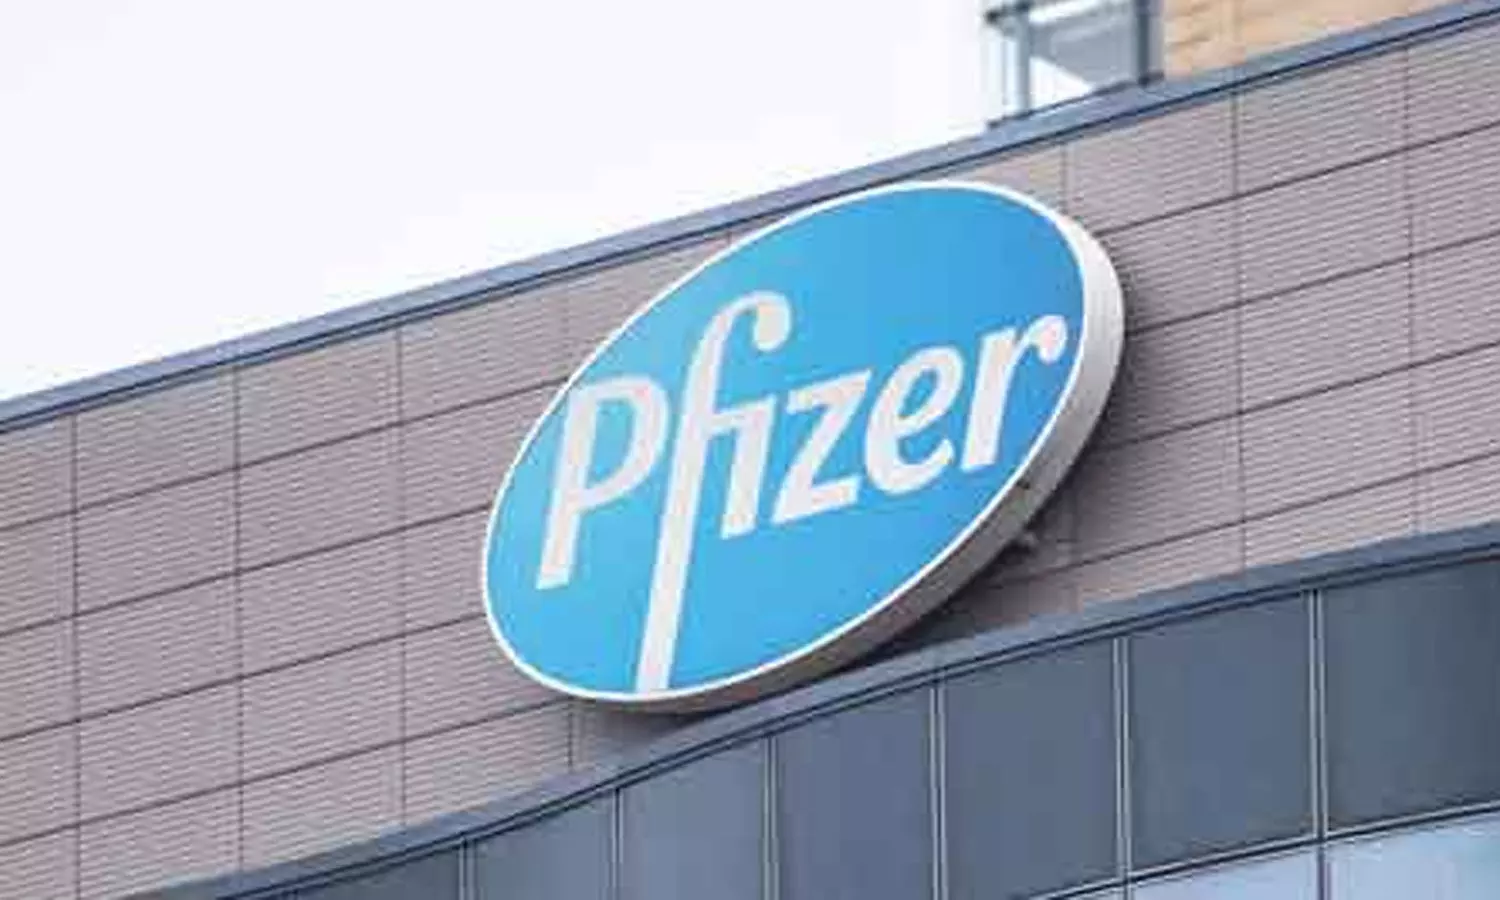 Pfizer BioNTech Covid-19 vaccine third dose likely needed within 1 year: CEO Albert Bourla